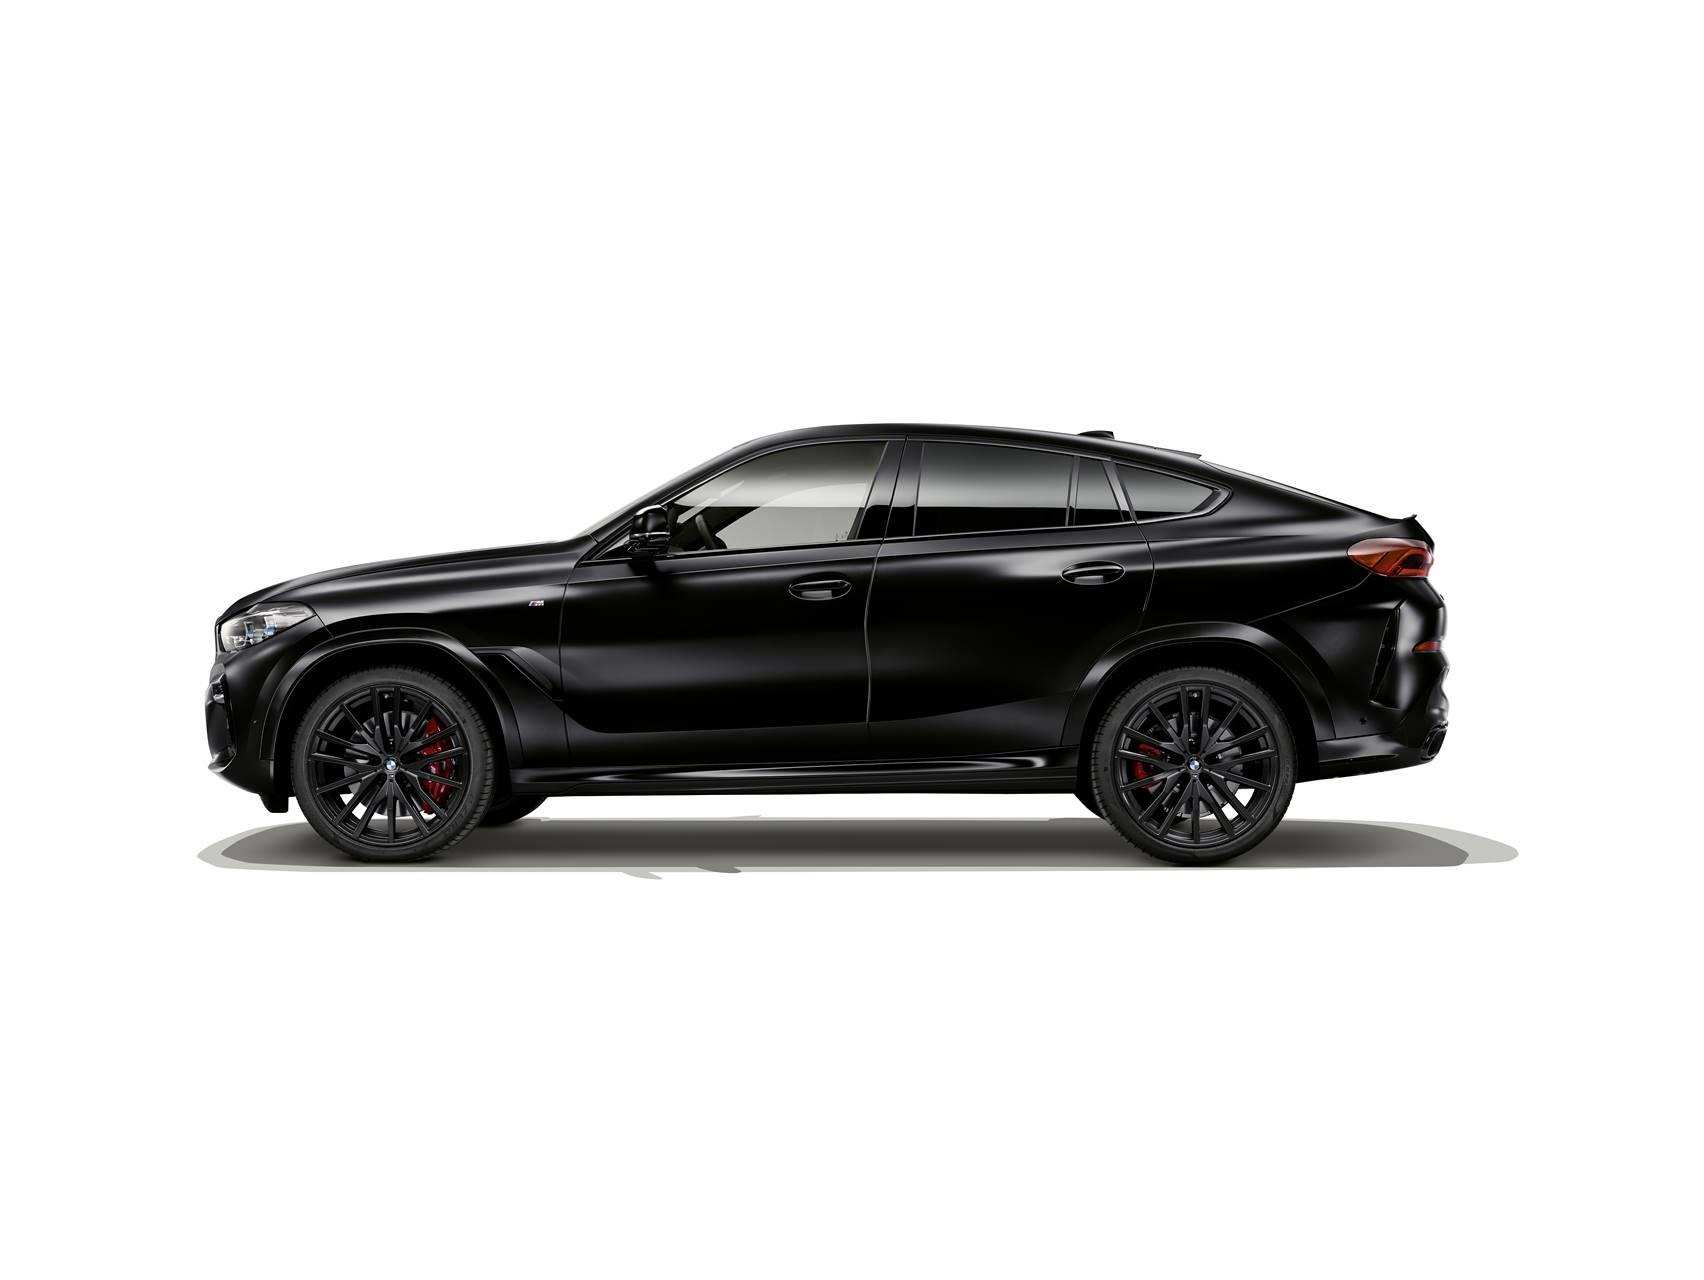 2021 BMW X6 Black Vermilion Limited Edition News and Information